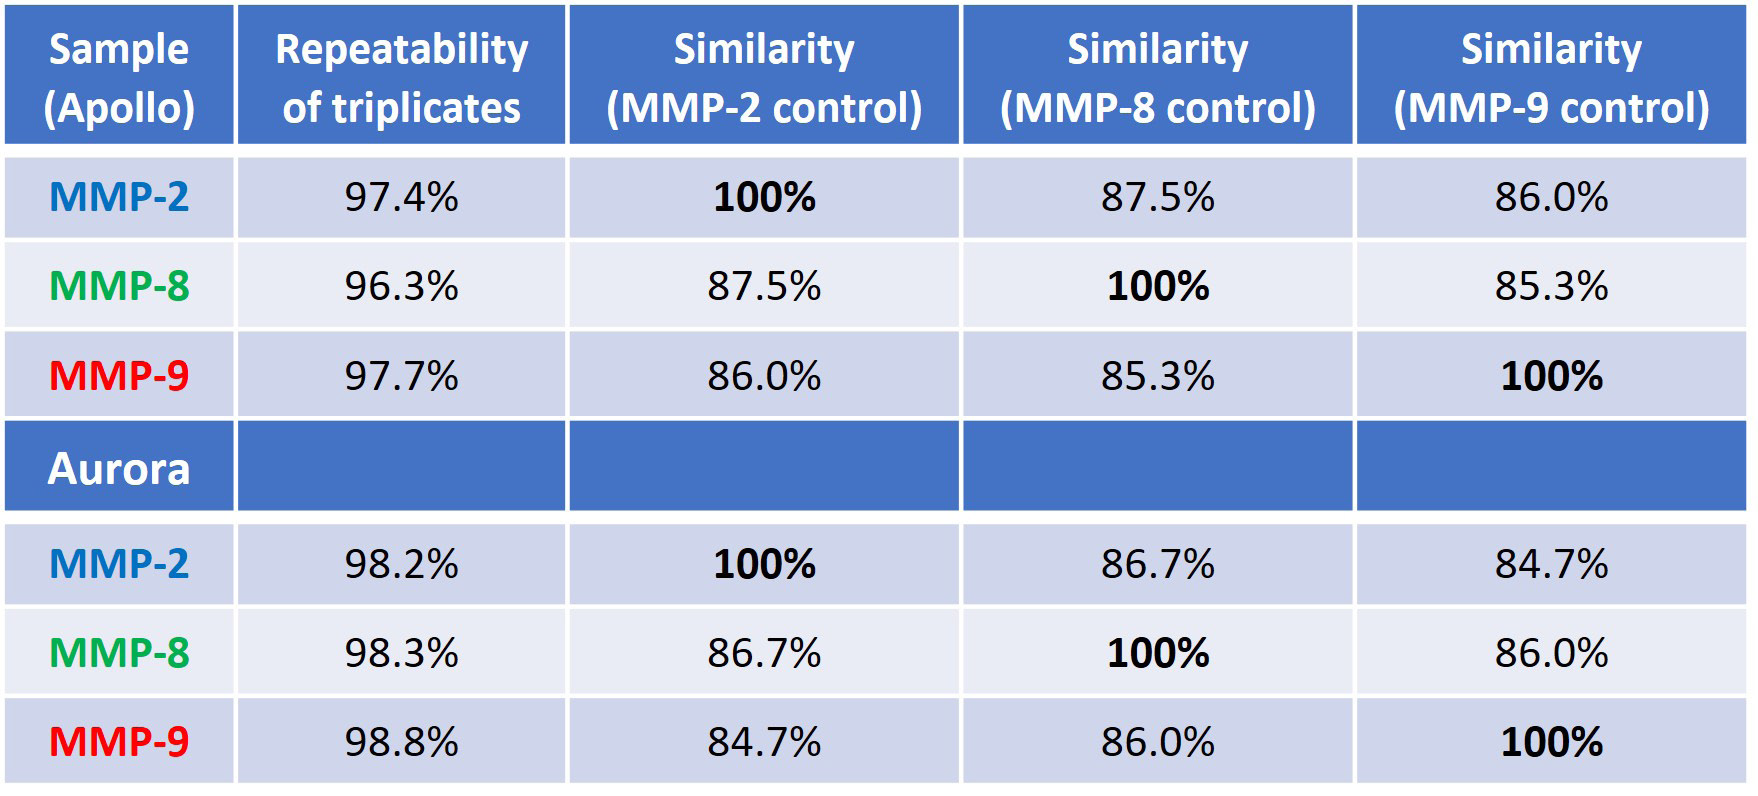 Repeatability of measurement and sample-to-sample similarity (the control for each similarity comparison is set at 100%). The top portion of the table is data from Apollo, and bottom is comparing data from Aurora.